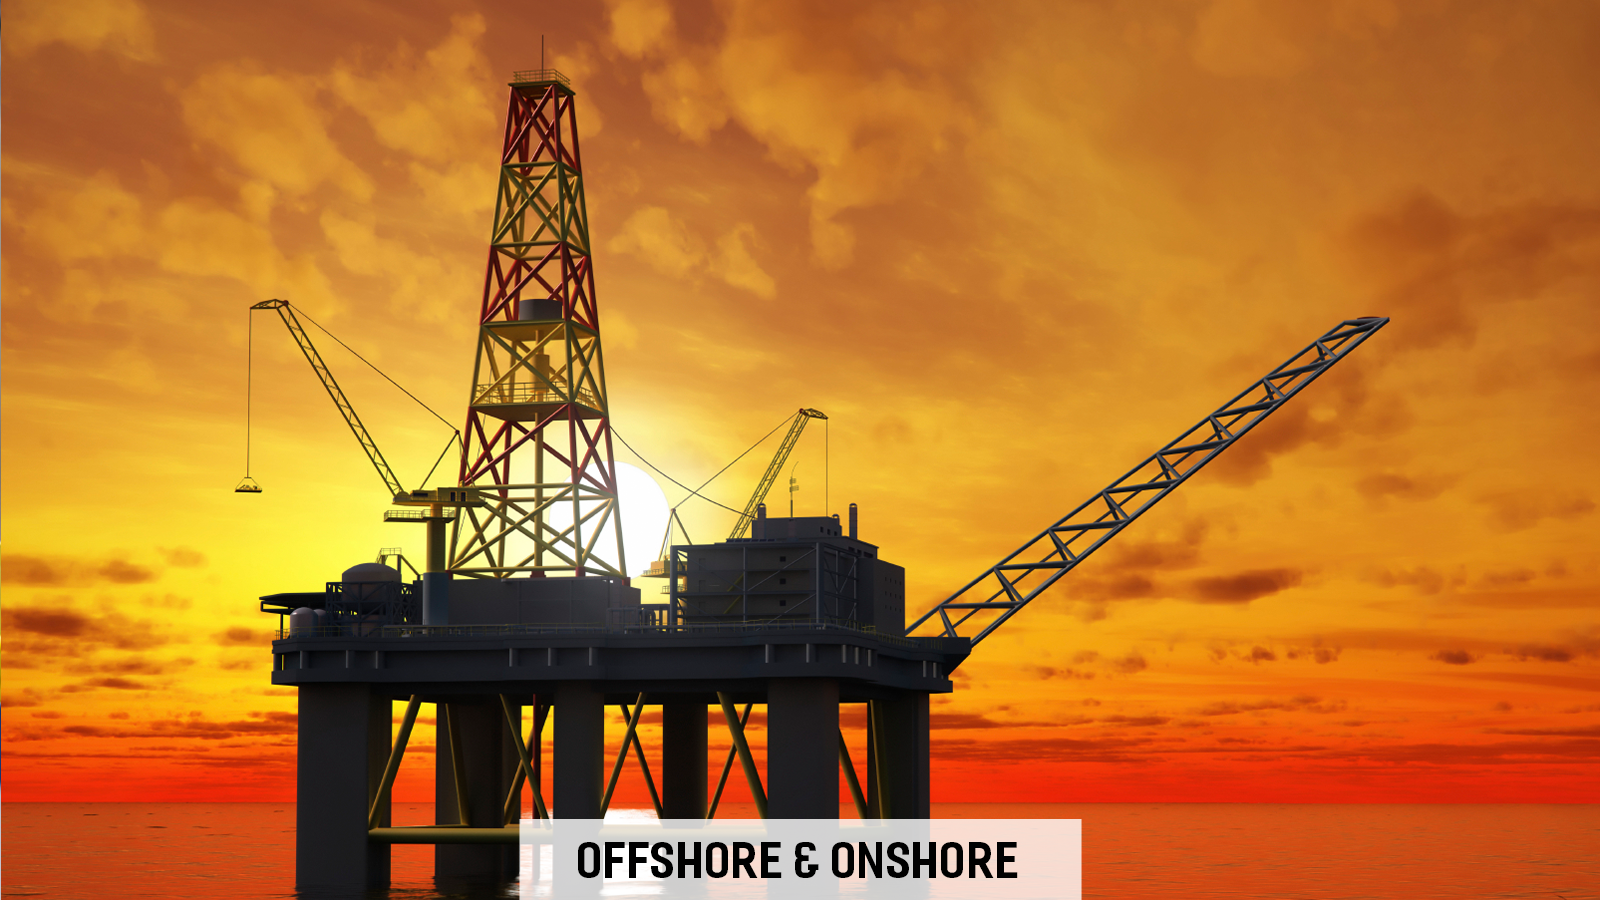 OFFSHORE & ONSHORE